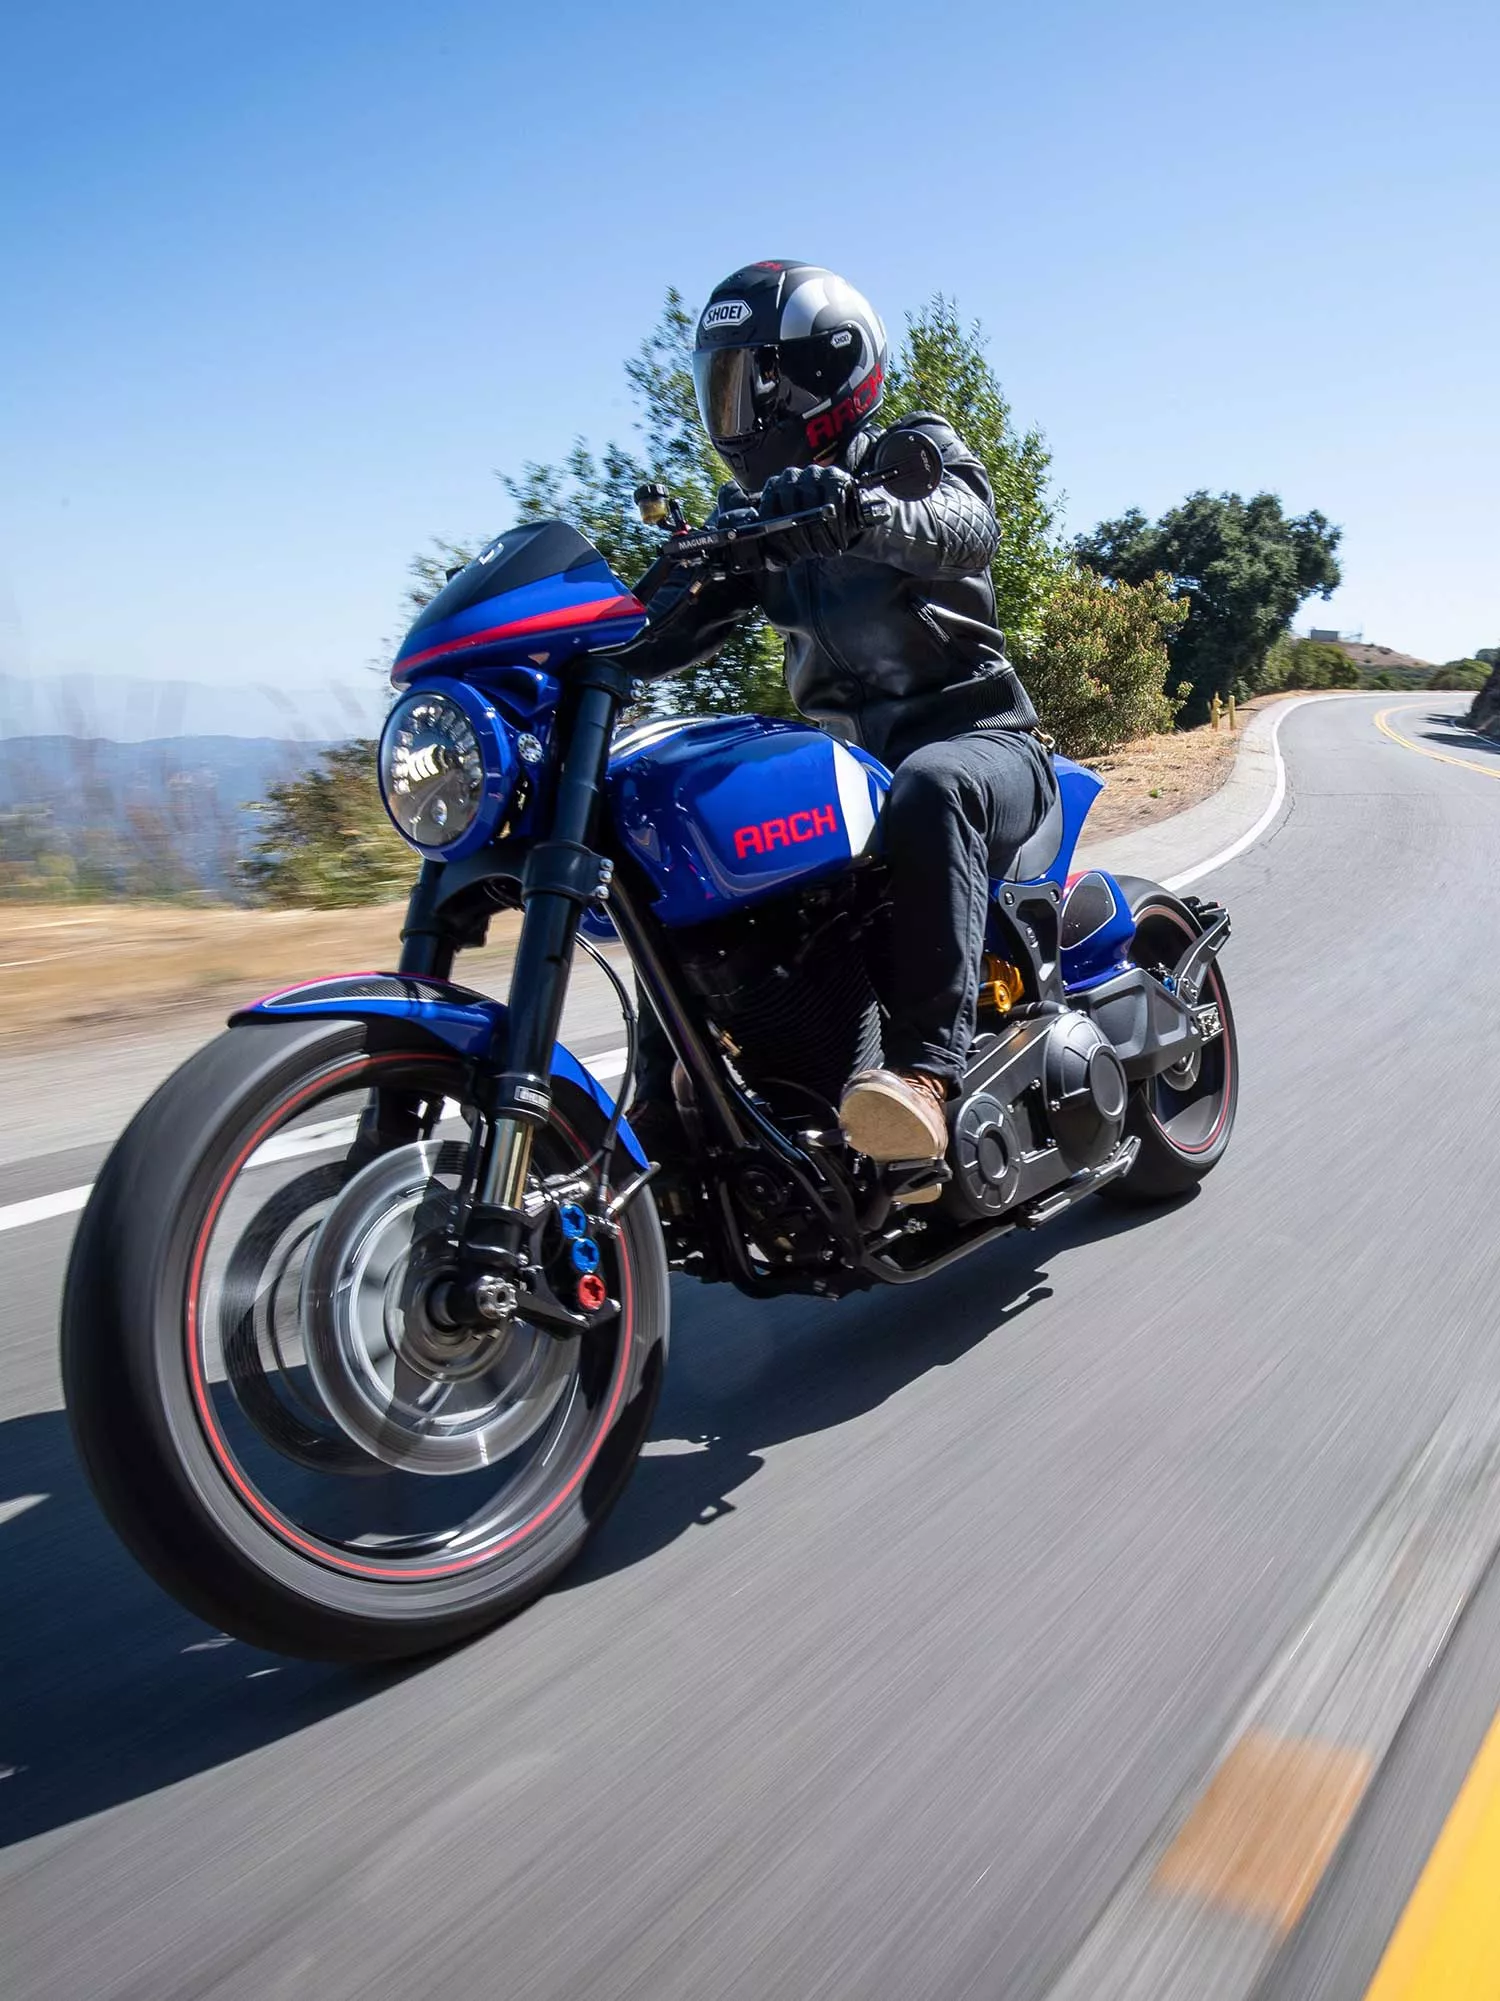 The latest KRGT-1 mixes roadster with touches of café racer, but at its heart is still that monster S&S 124ci V-twin motor that screams hot rod.